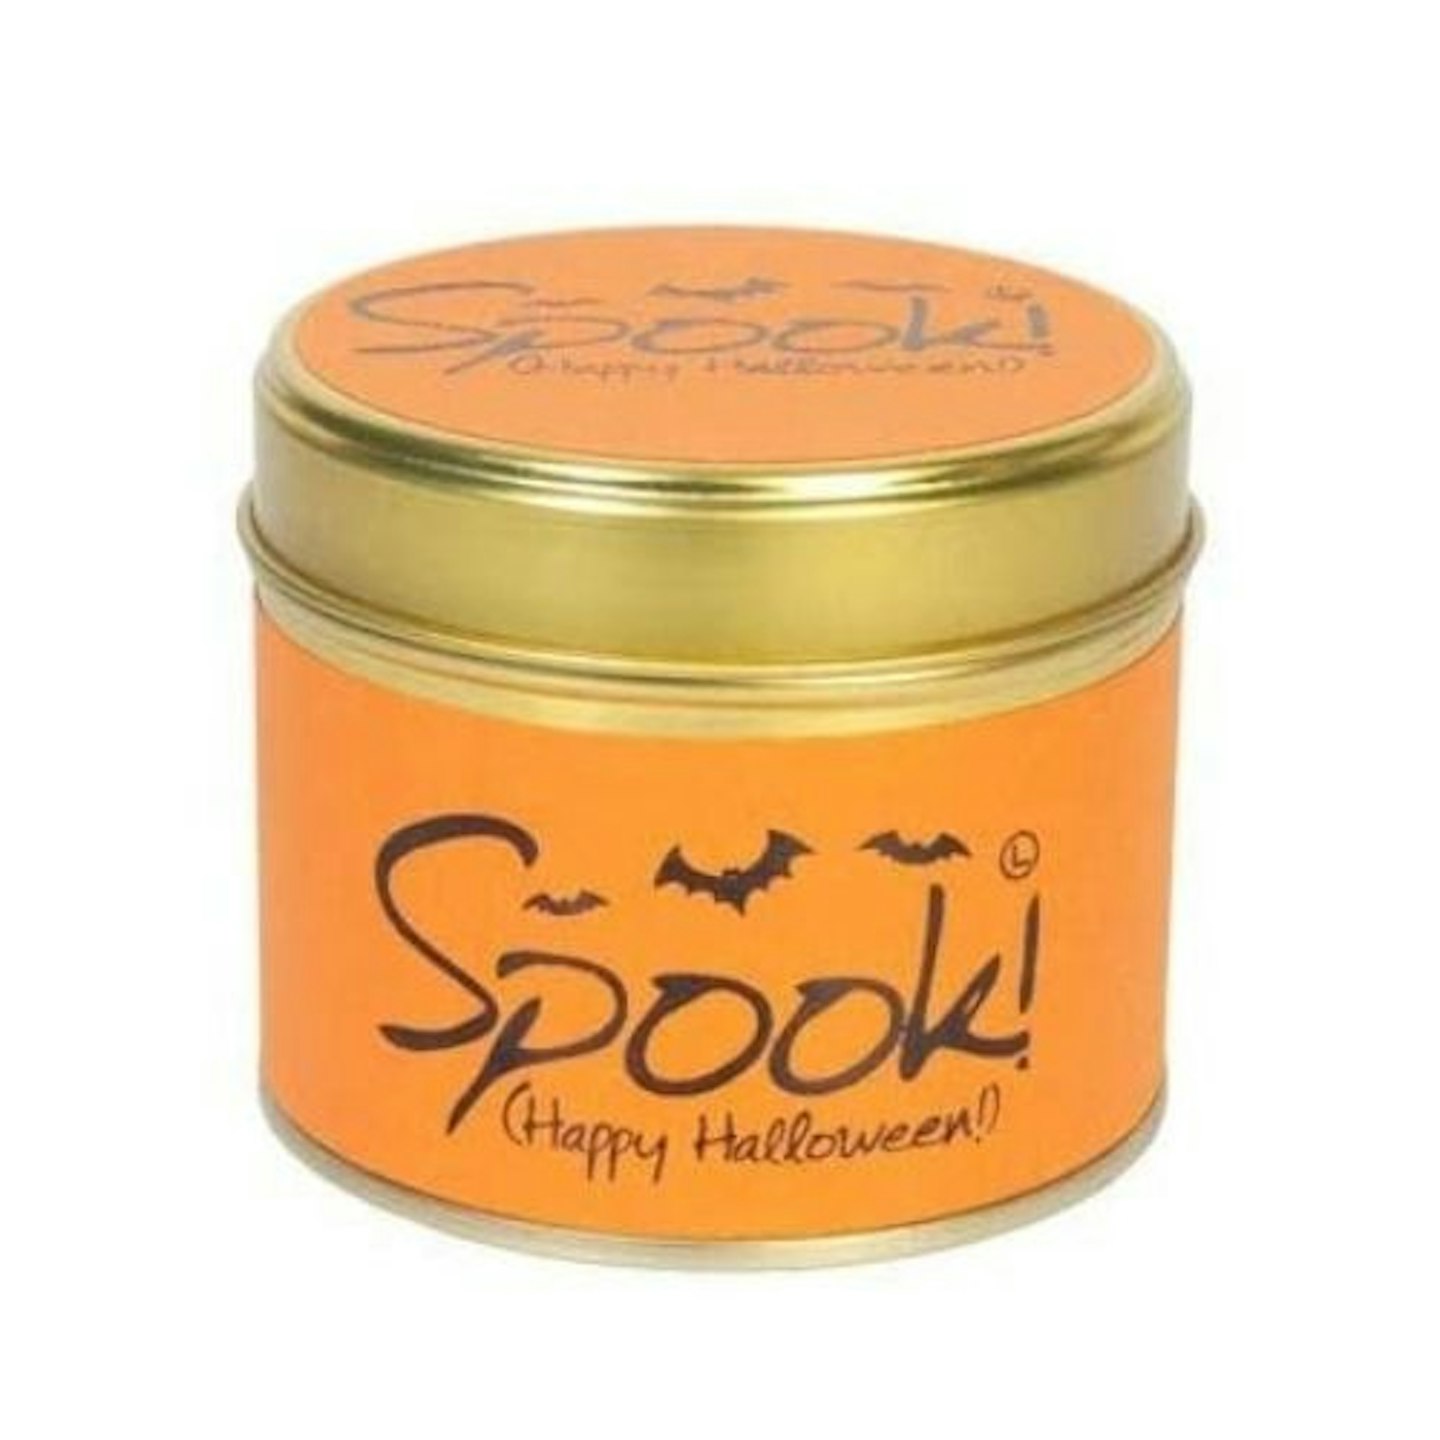 Lily Flame Spook! Tin